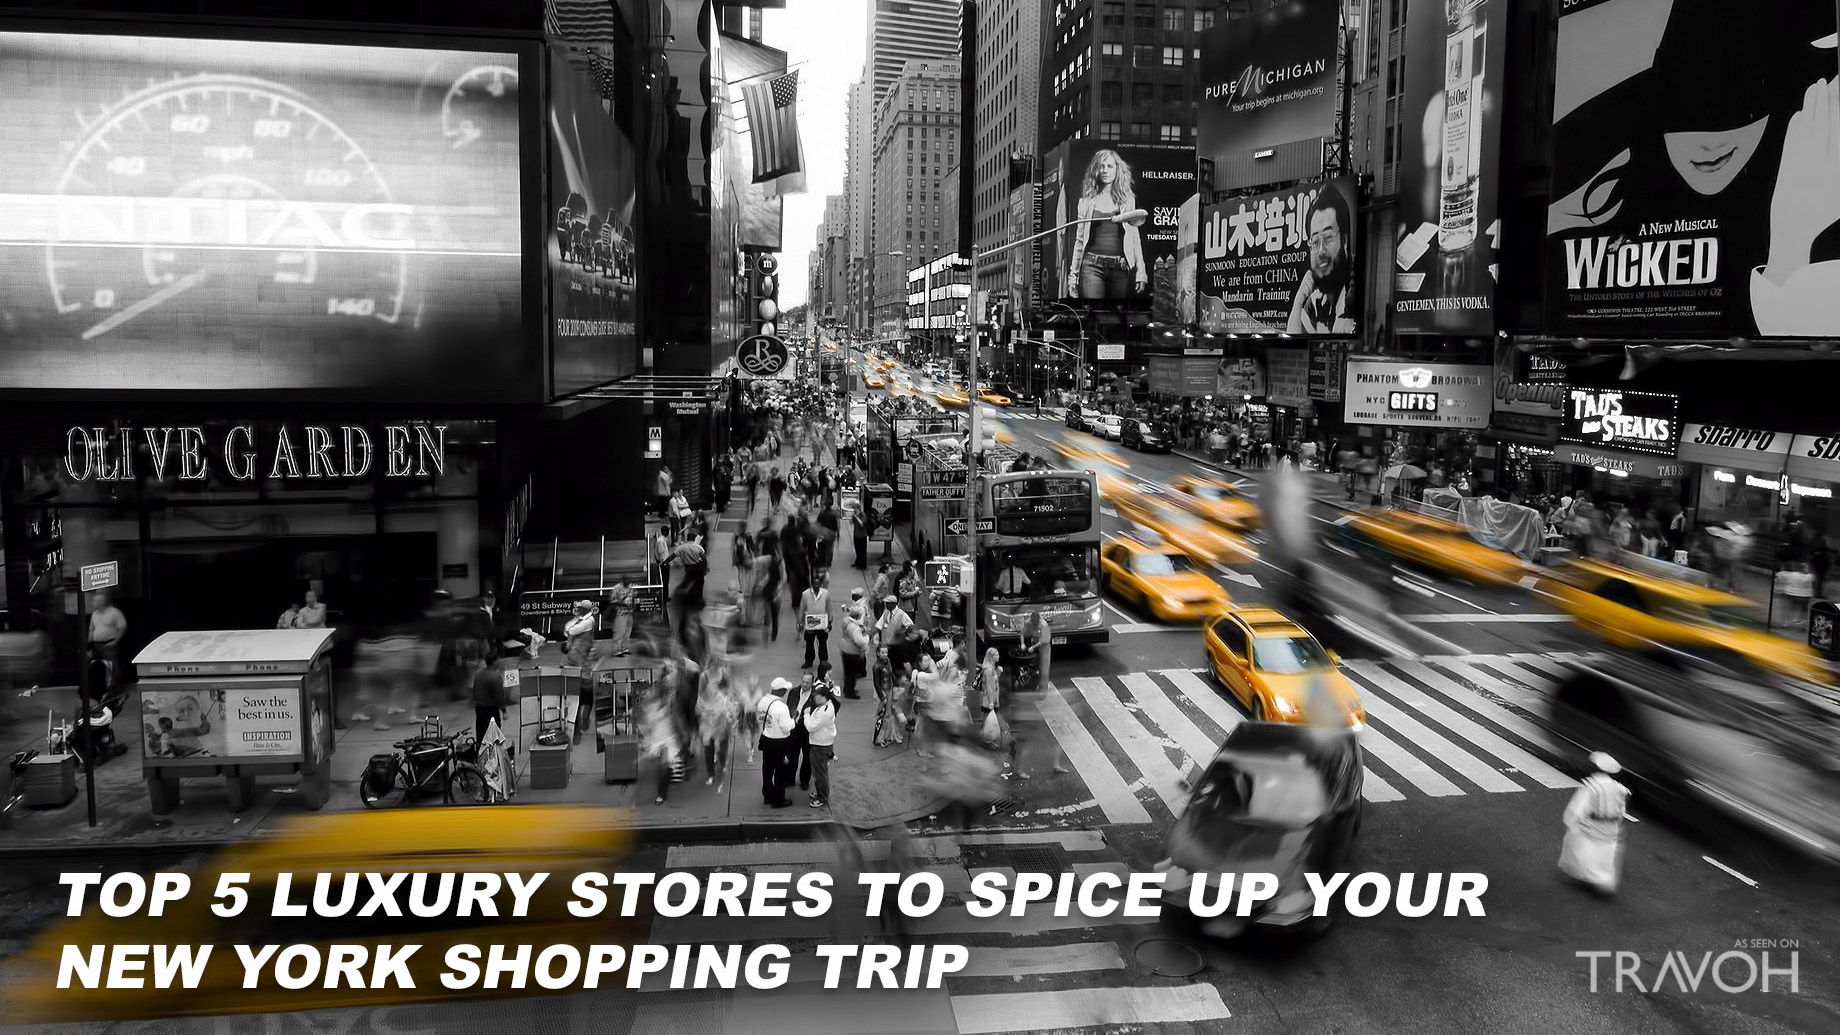 Top 5 Luxury Stores to Spice Up your New York Shopping Trip